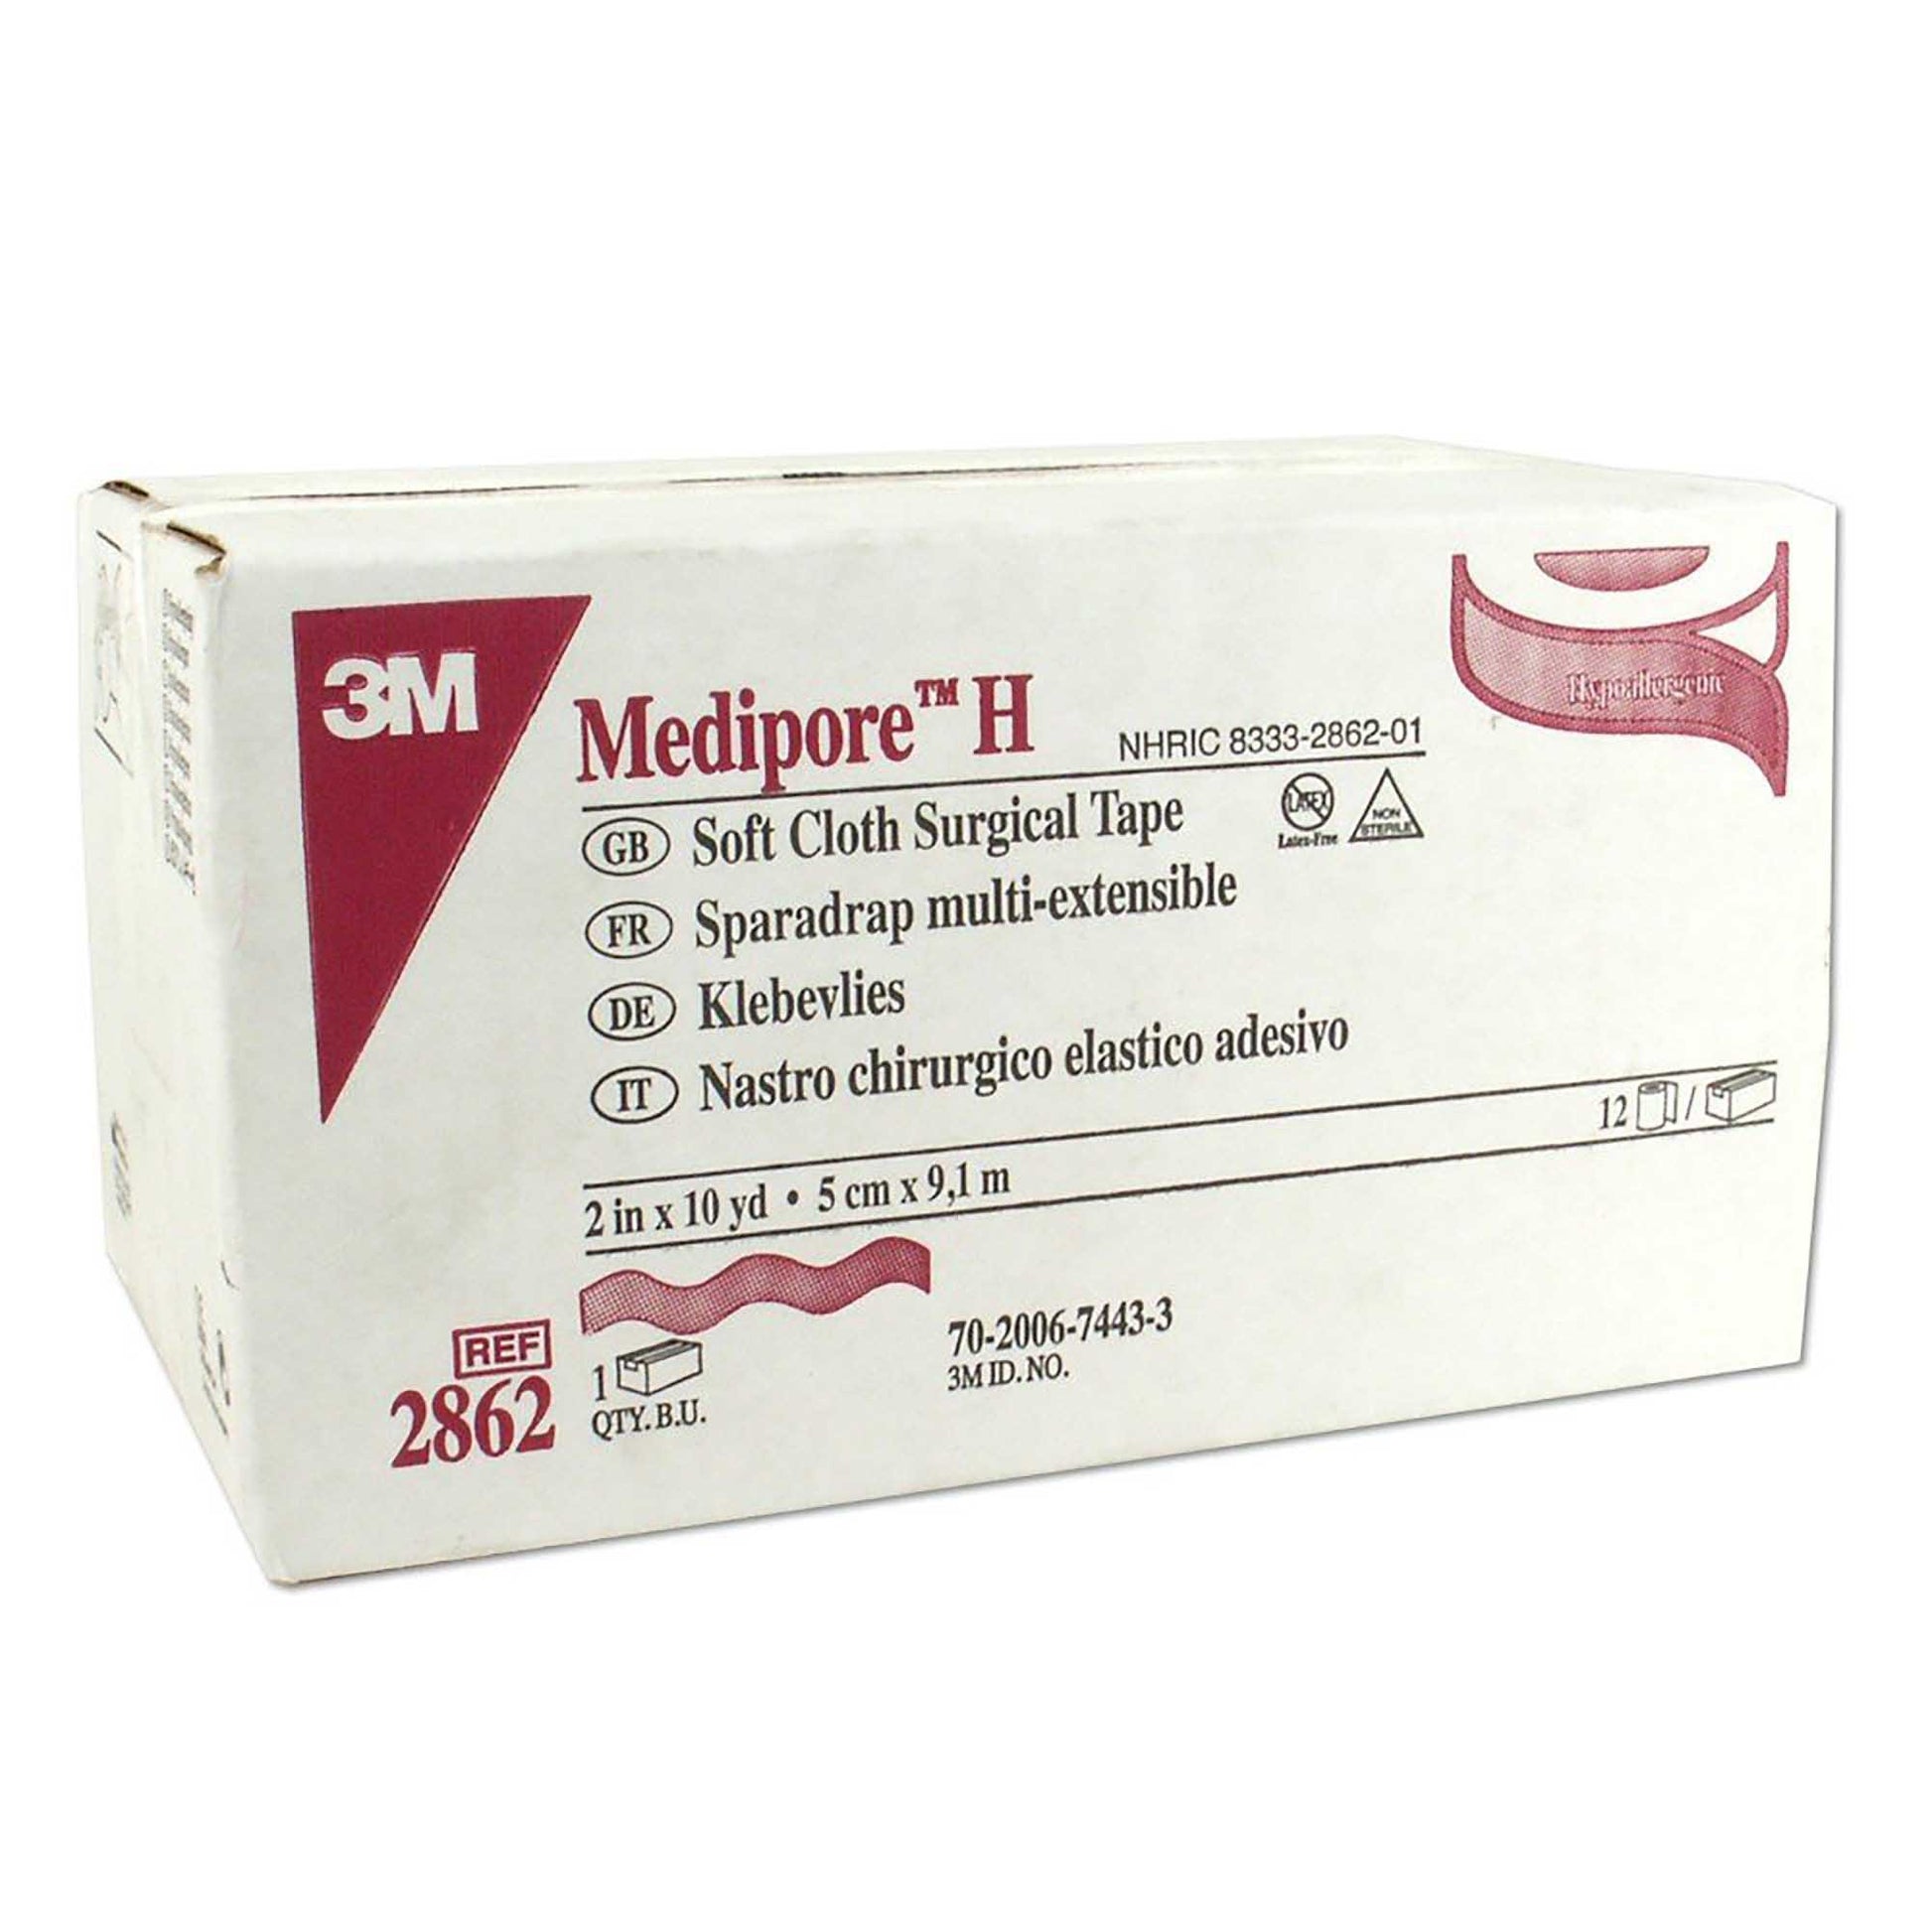  3M 2863 Medipore H Soft Cloth Surgical Tape 3 x 10 Yards - 2  Rolls : Health & Household